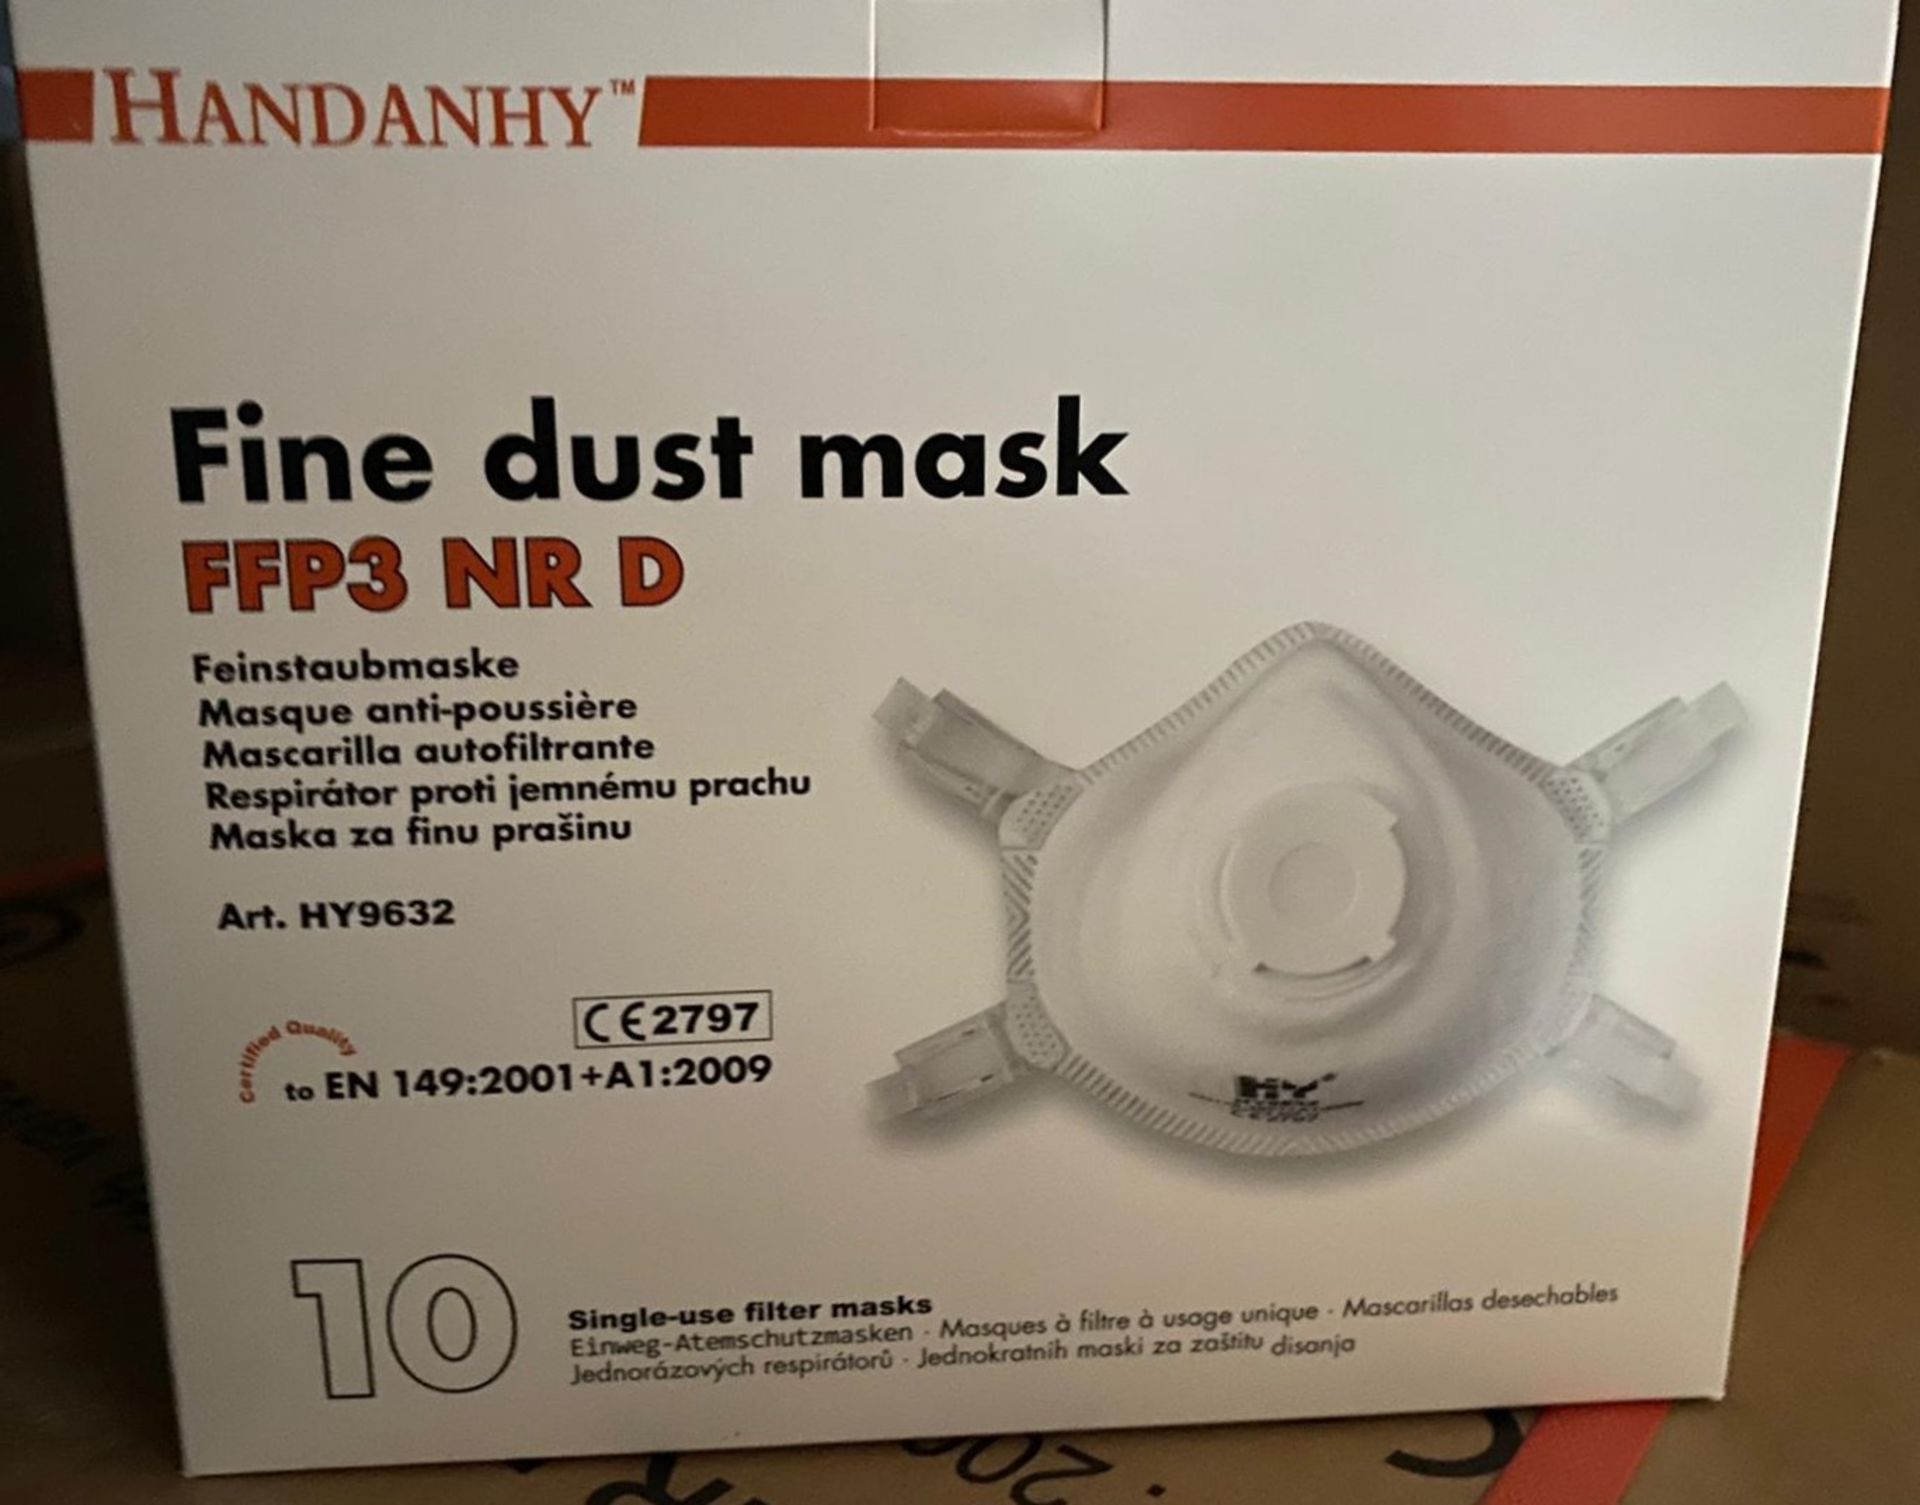 1,000 x Handanhy Fold Flat Disposable Face Masks With Exhalation Valves - Type HY8232 FFP3 - PPE - Image 5 of 5